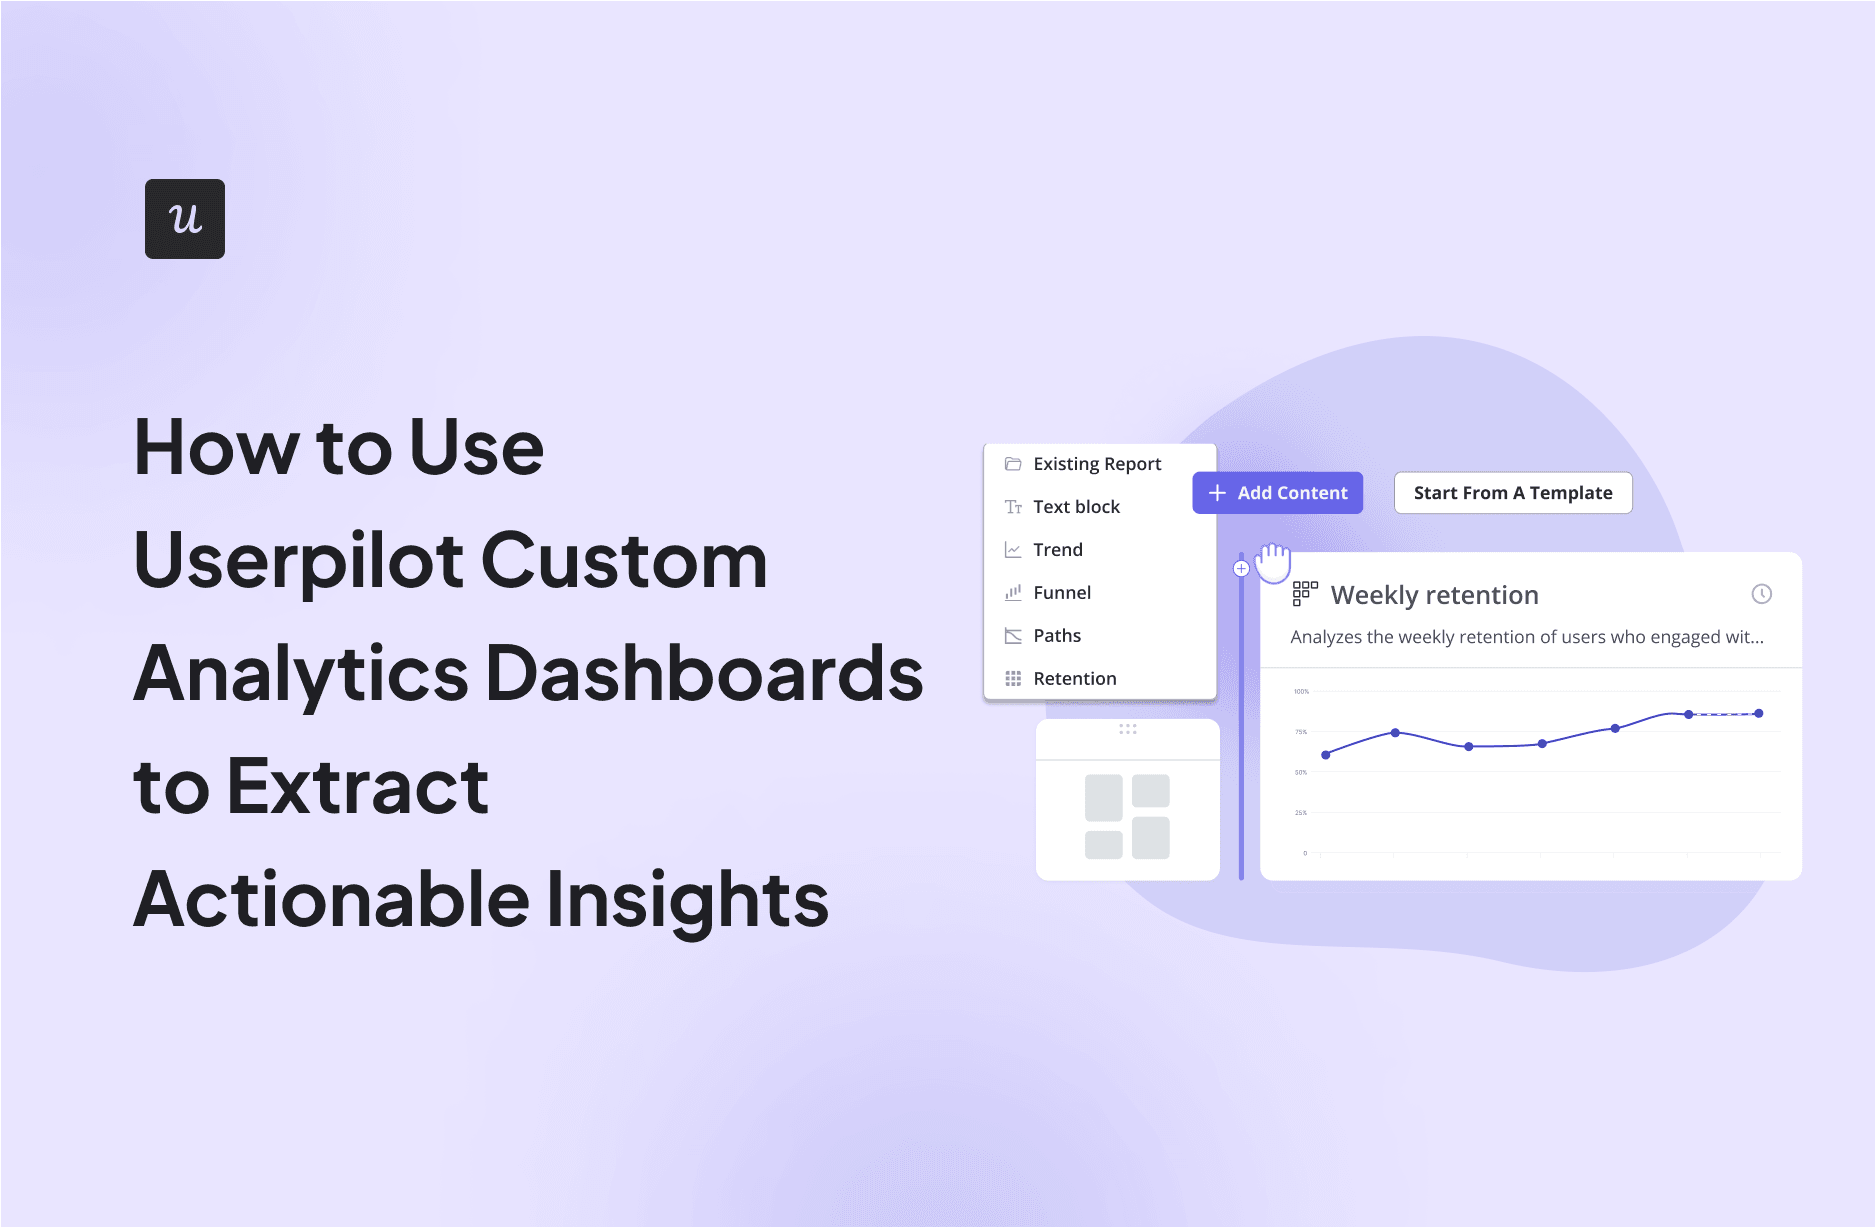 How to Use Userpilot Custom Analytics Dashboards to Extract Actionable Insights cover